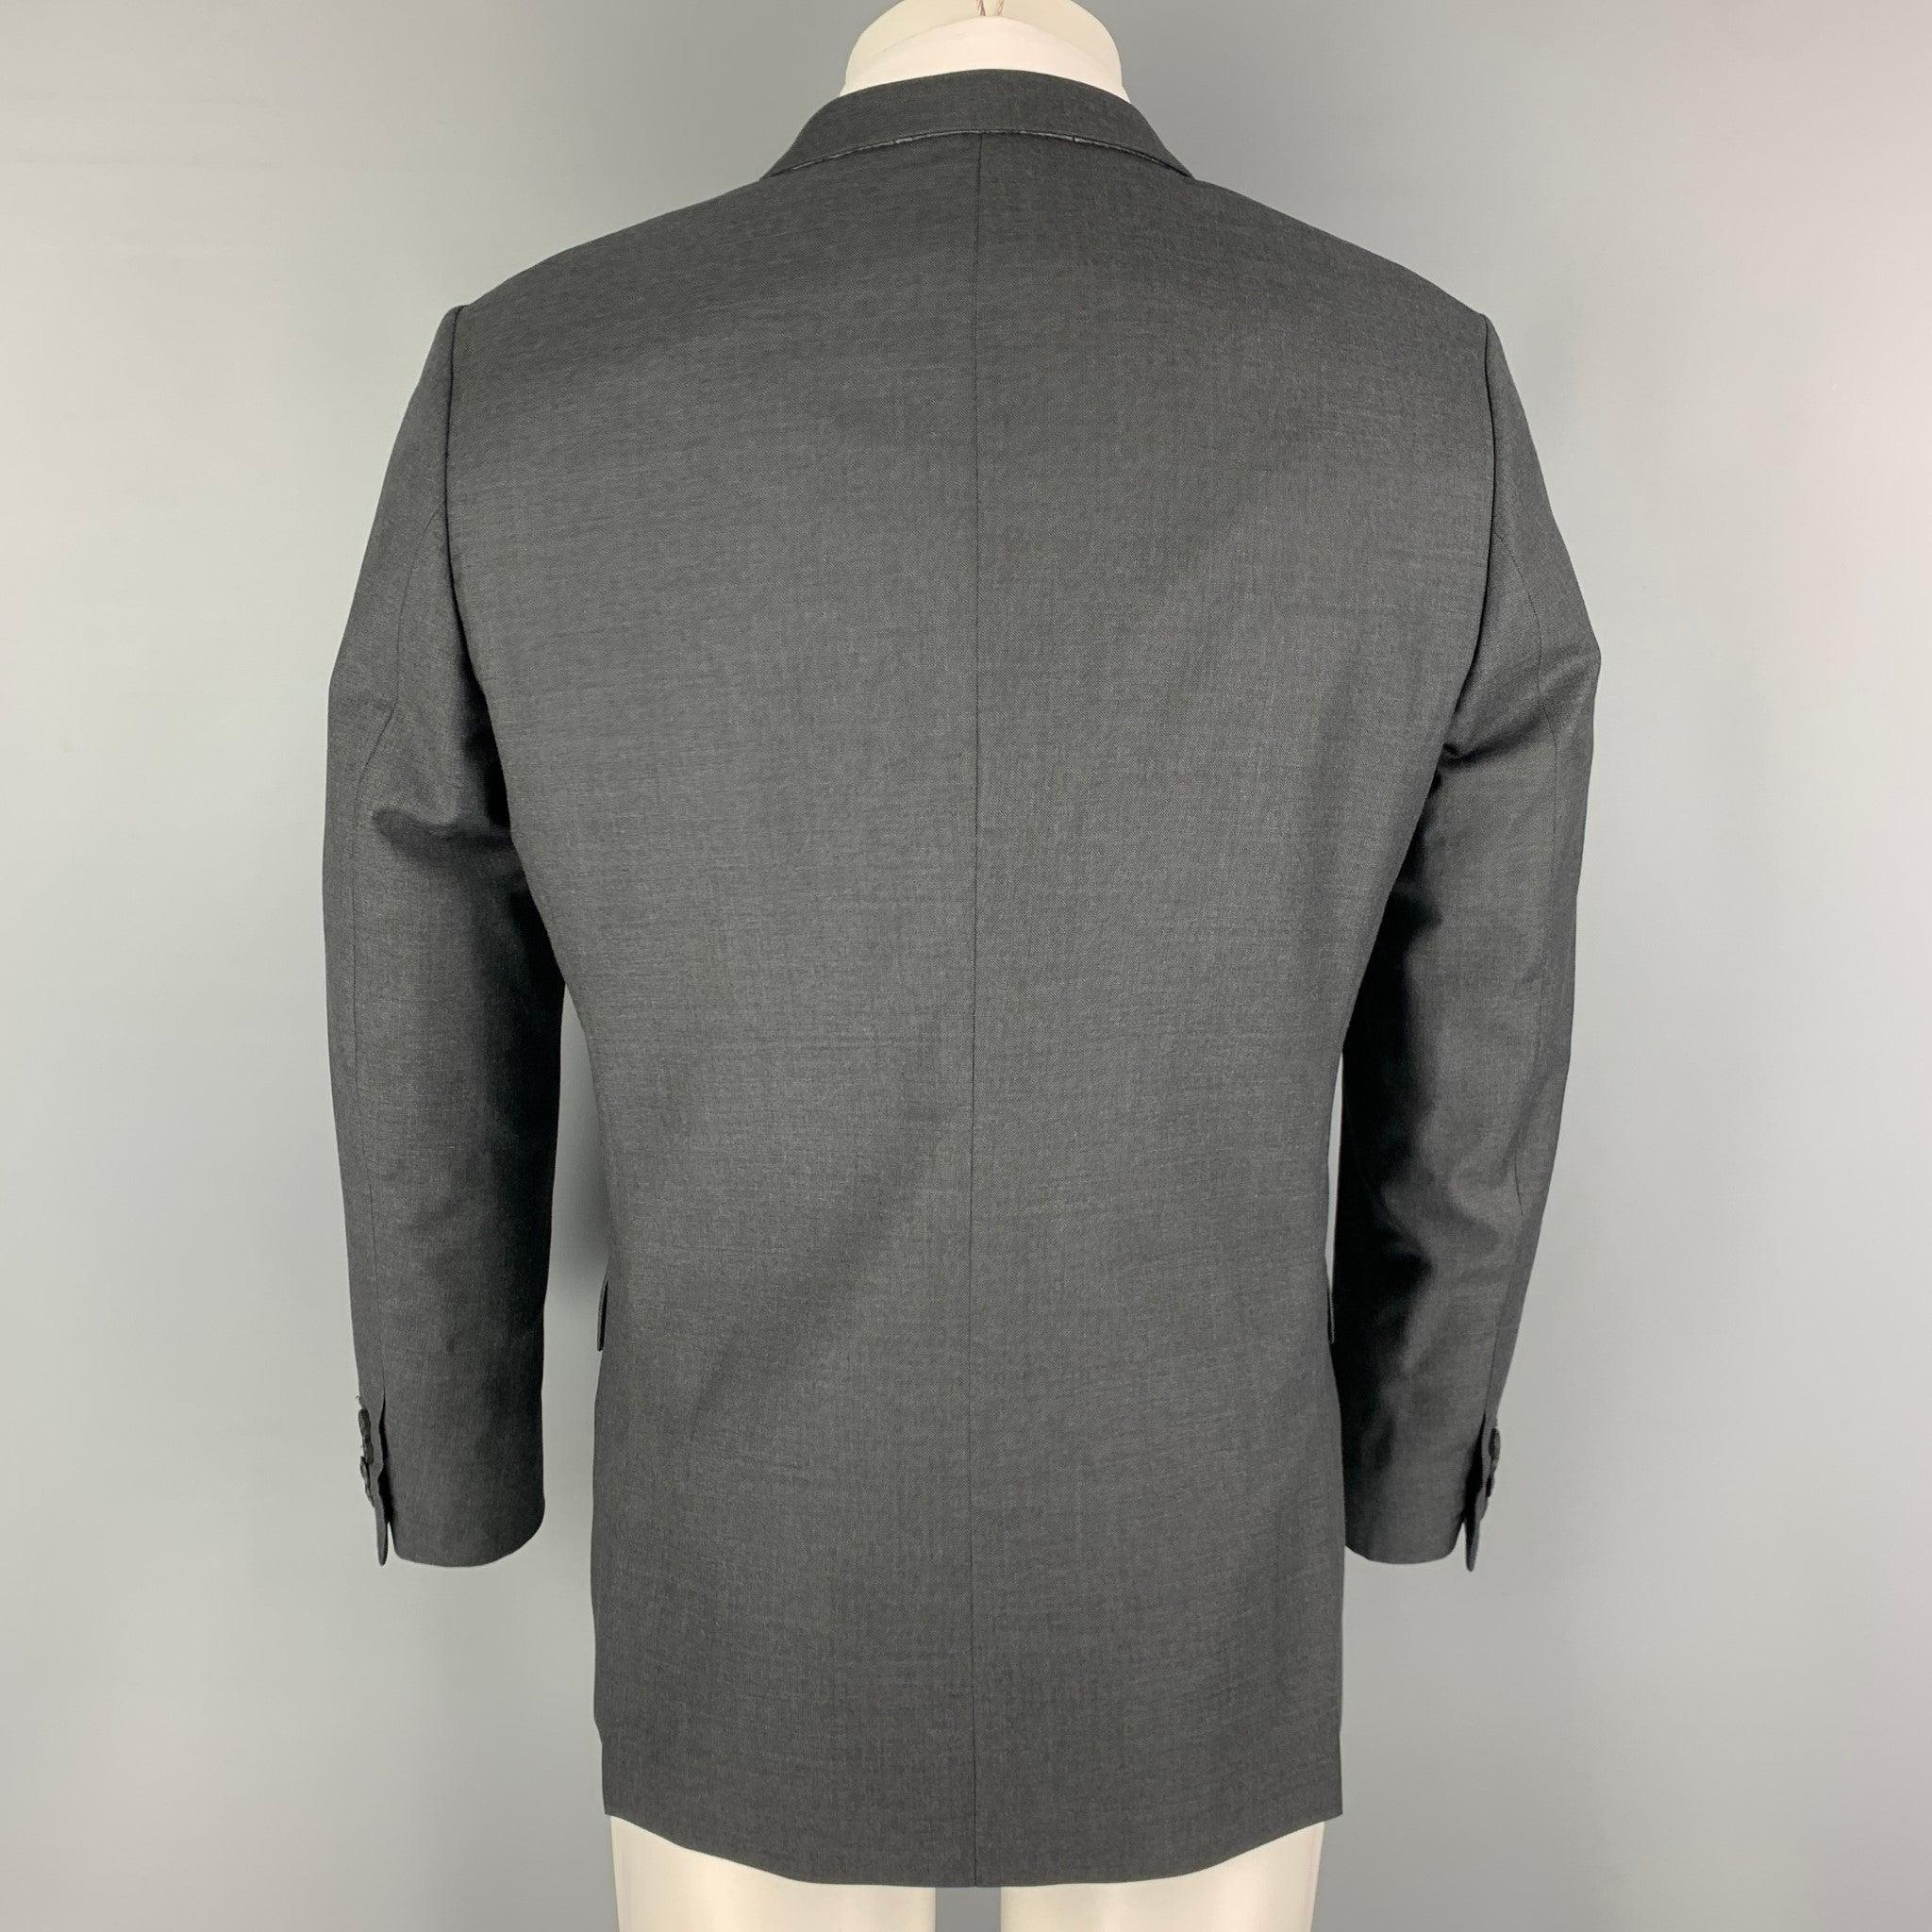 THE KOOPLES Size 38 Charcoal Wool Peak Lapel Sport Coat In Good Condition For Sale In San Francisco, CA